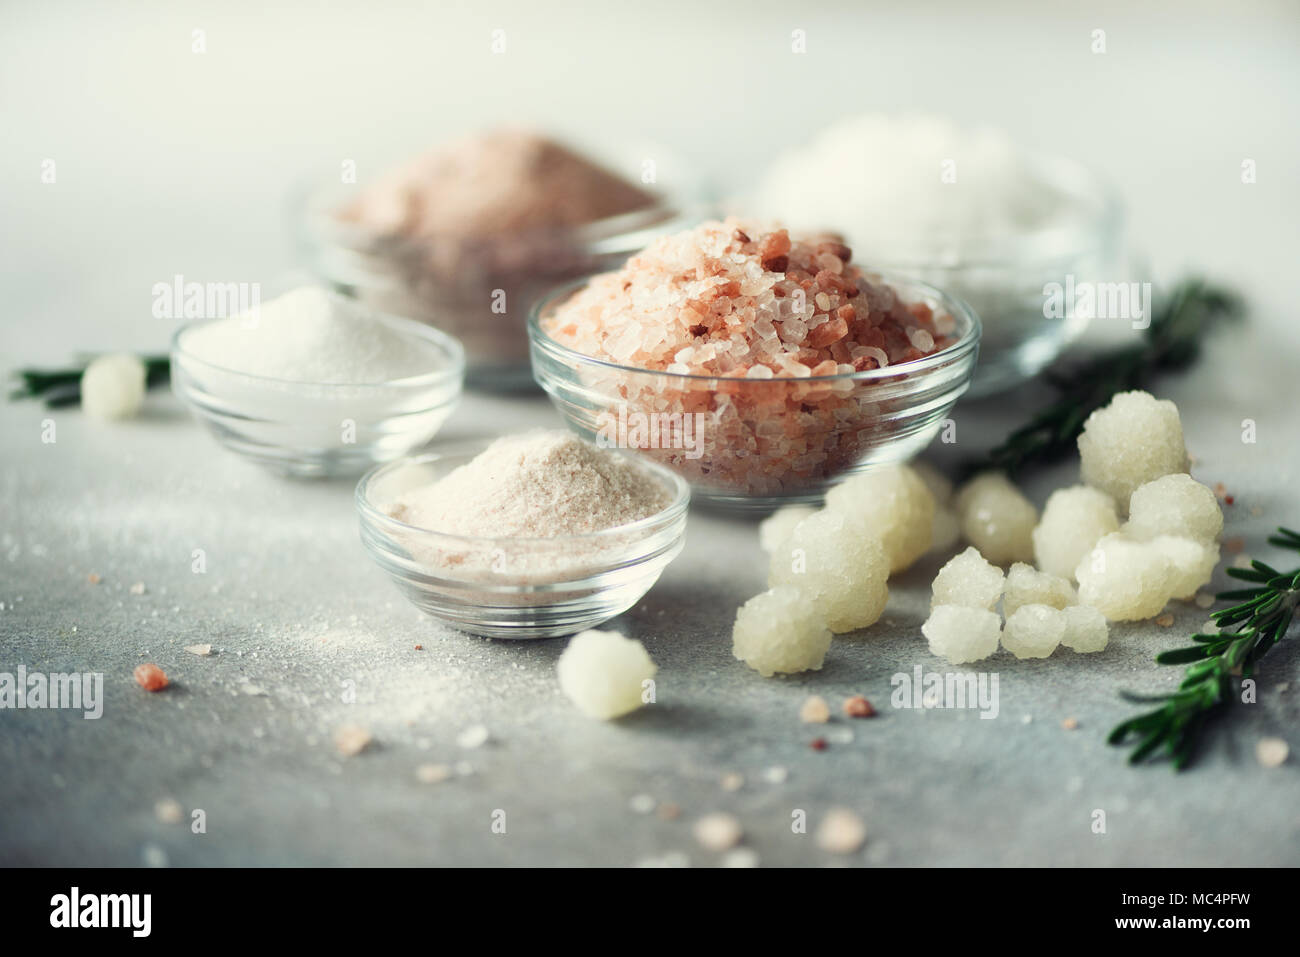 Mix of different salt types on grey concrete background. Sea salts, black and pink Himalayan salt crystals, powder, rosemary. Salt crystal balls from Dead sea. Copy space Stock Photo